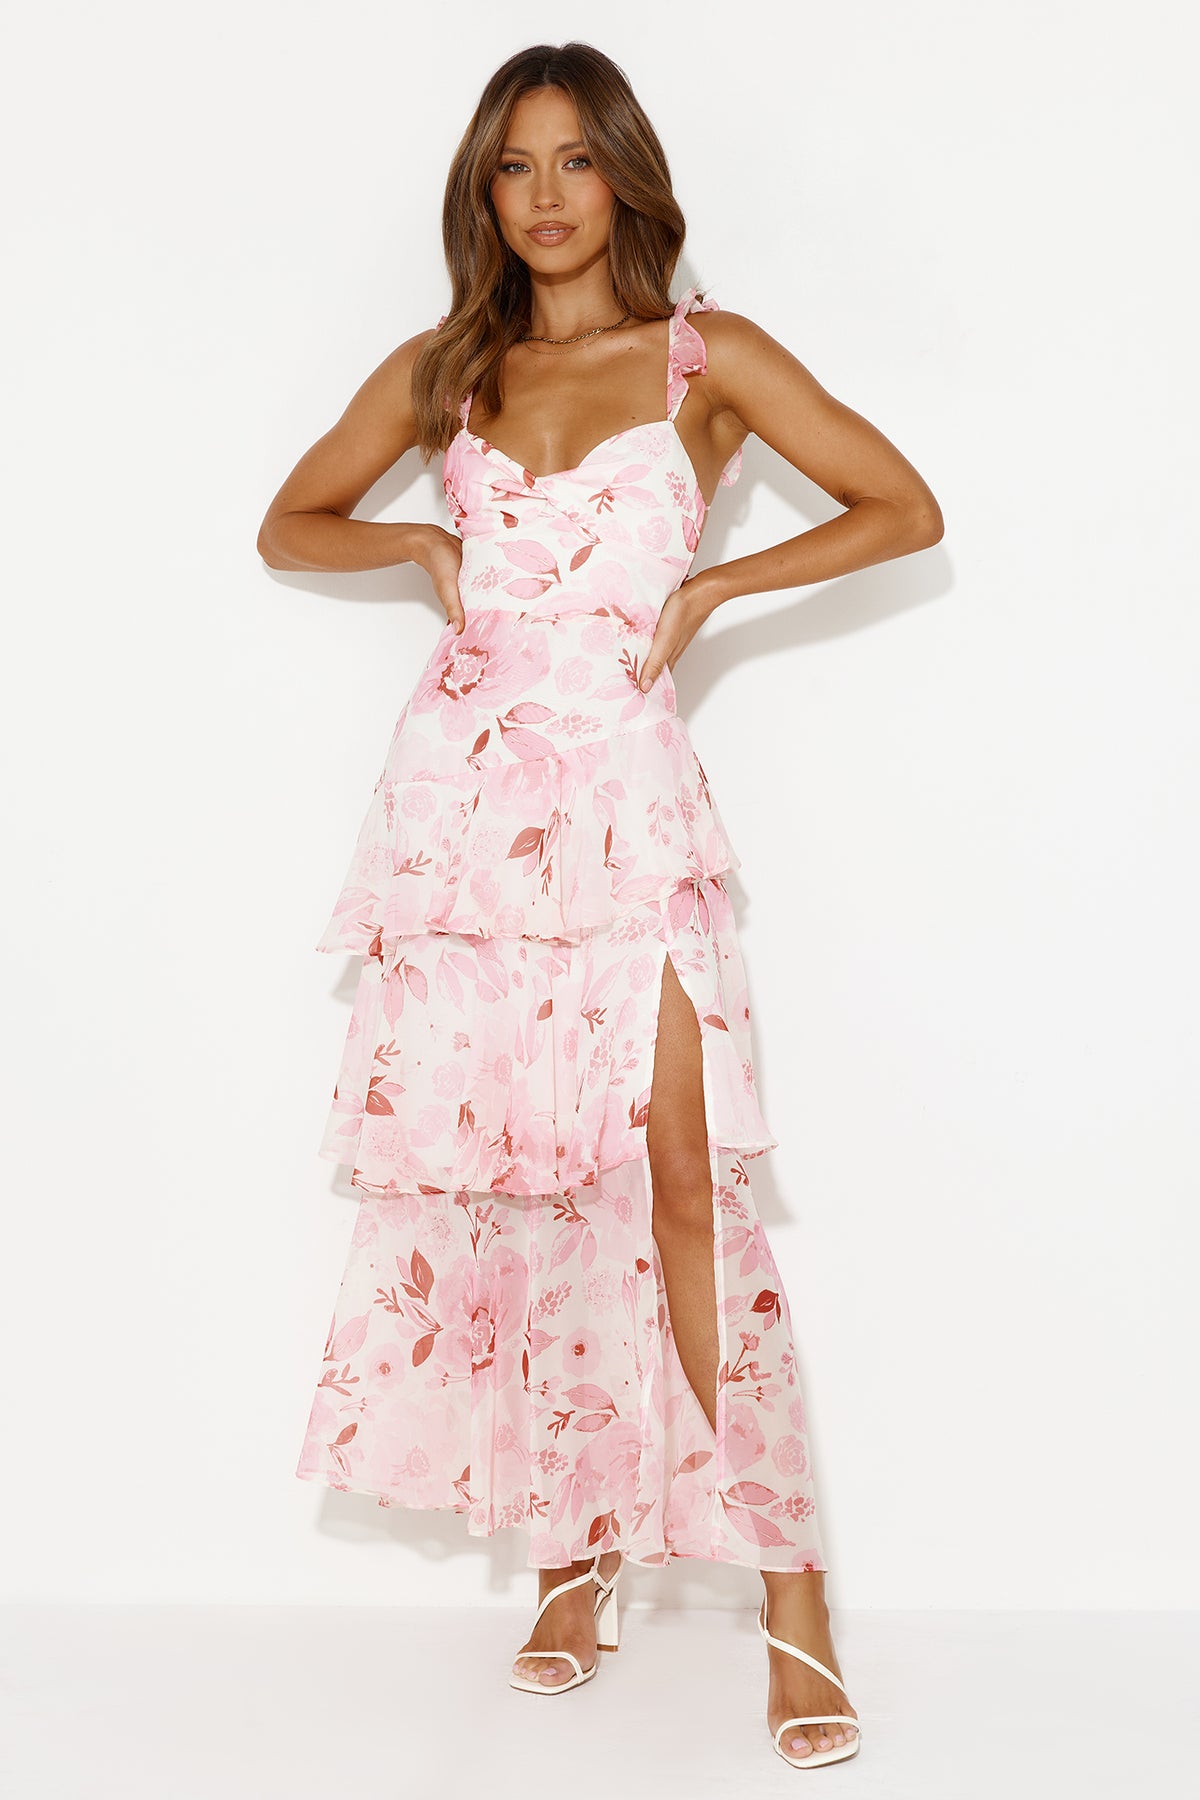 Shop Formal Dress - Refreshing Oasis Maxi Dress Pink featured image